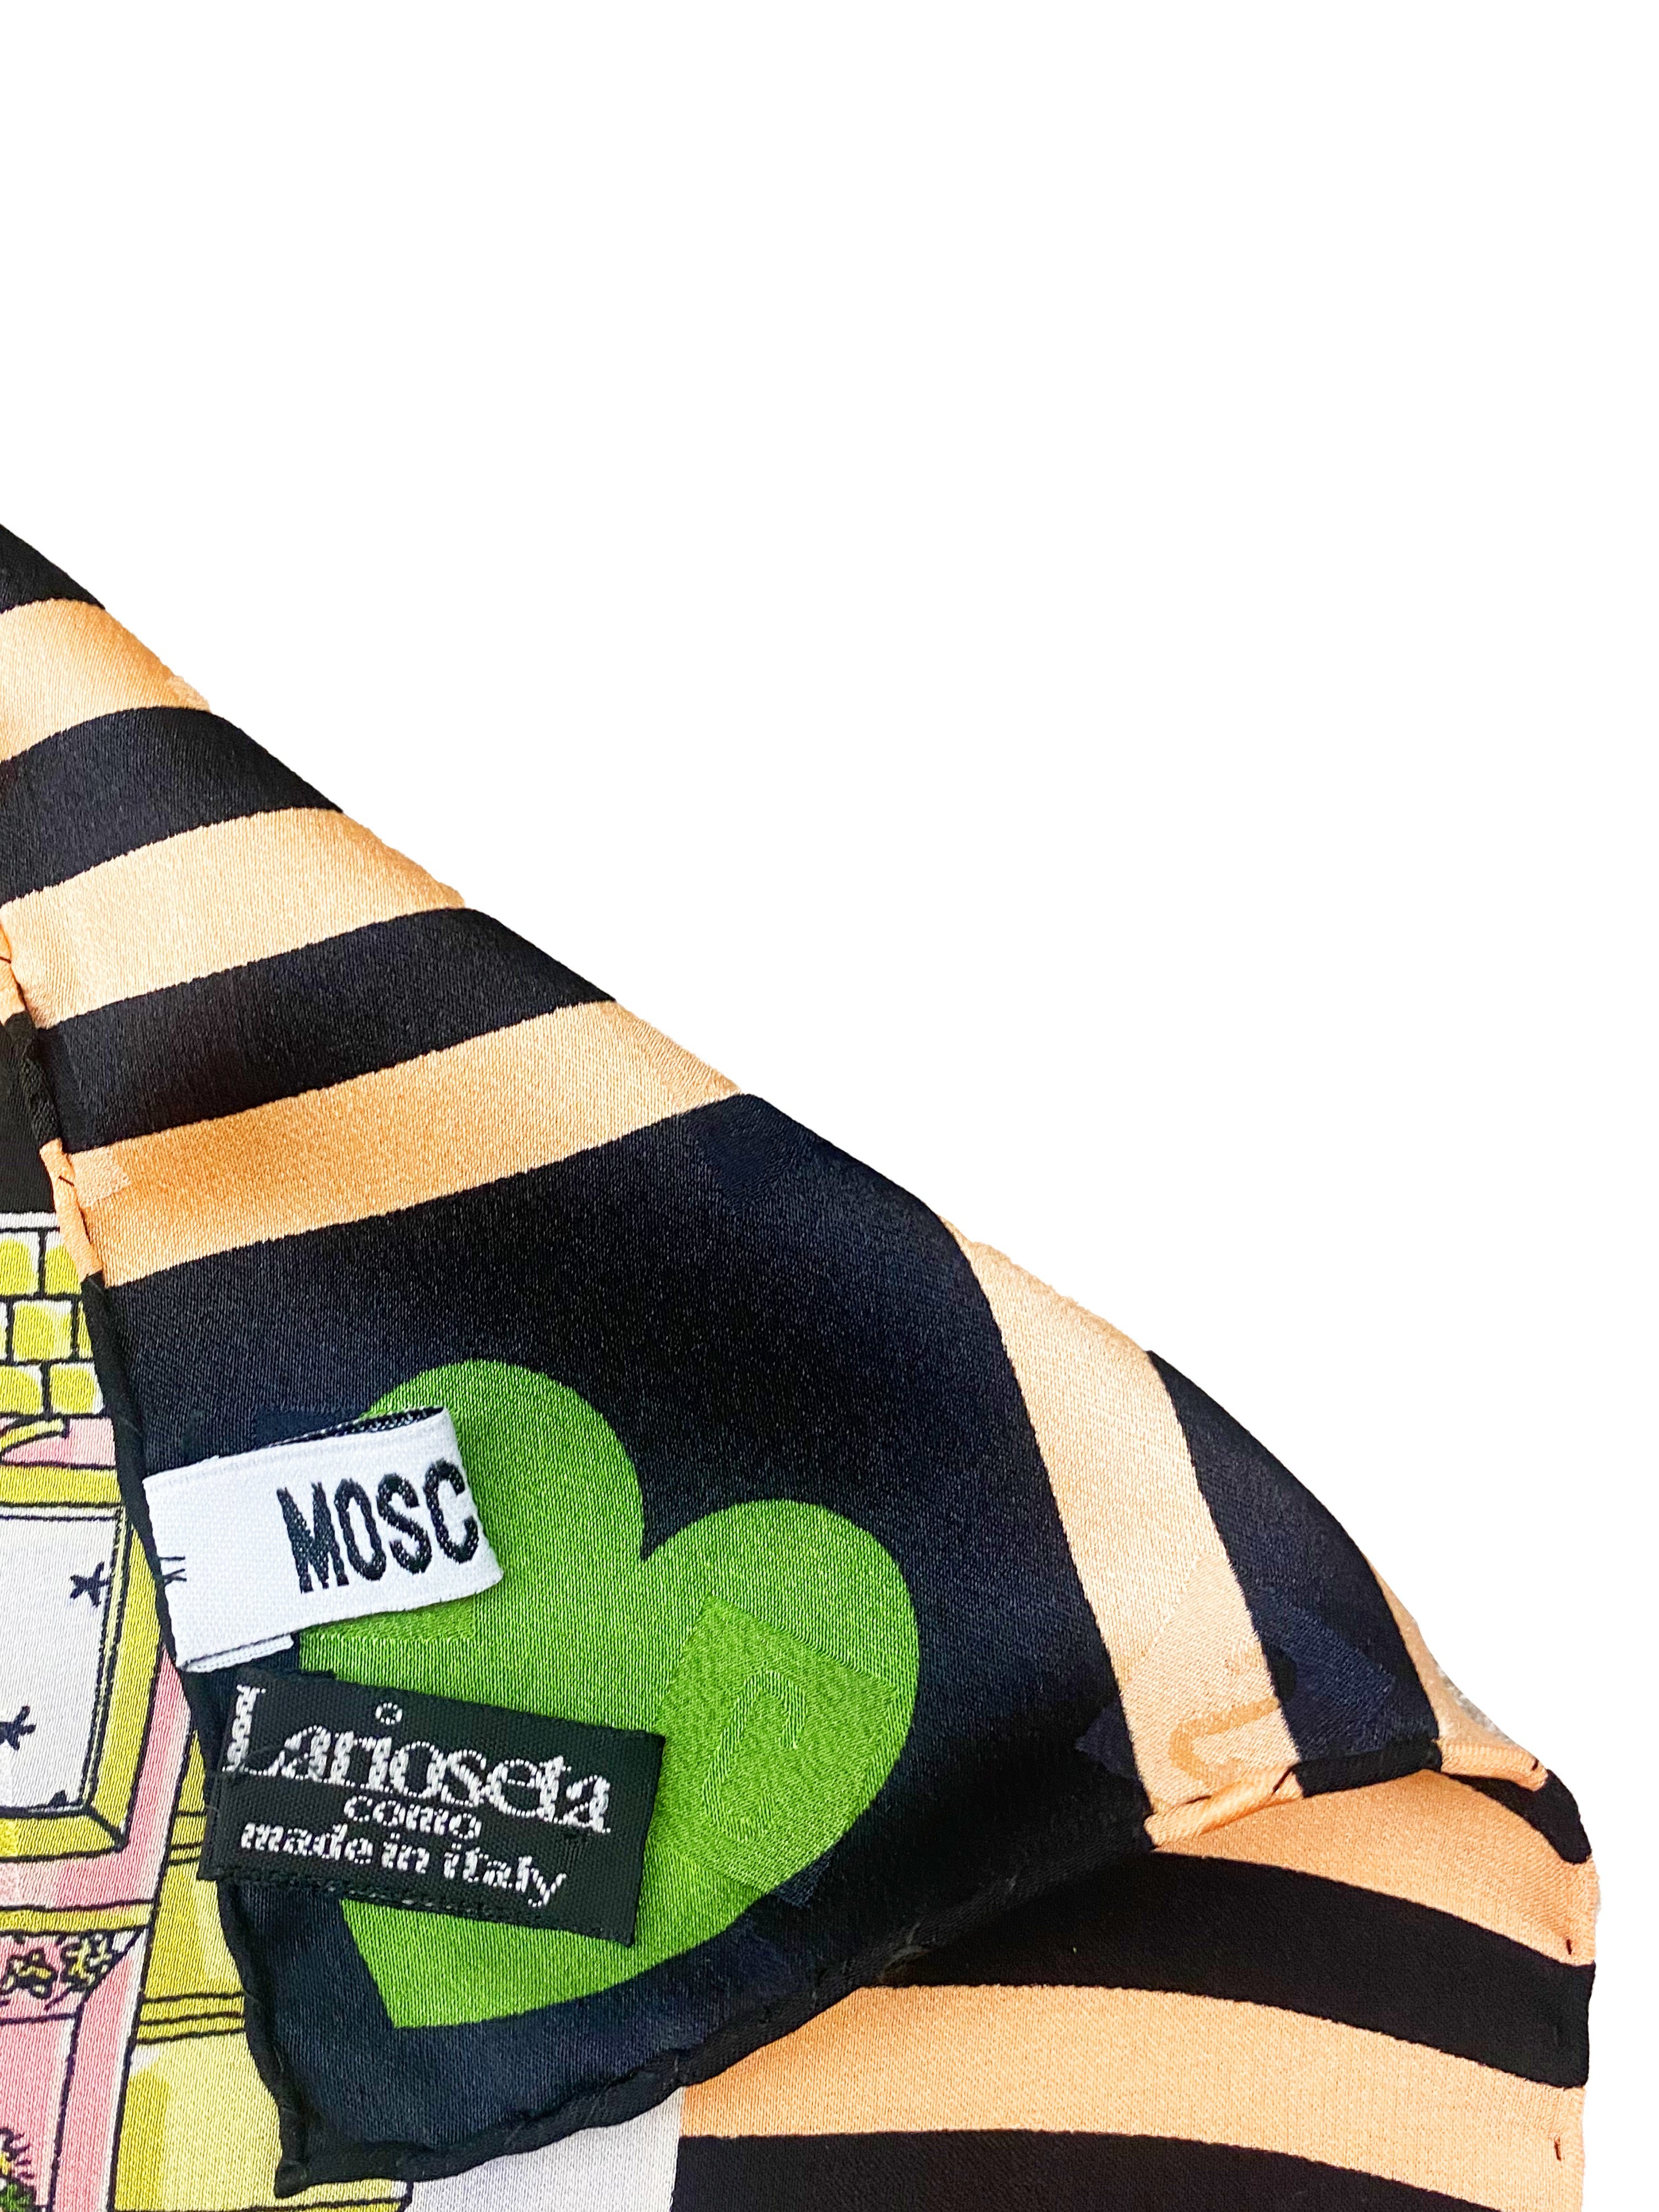 Moschino Choose A Life In Style Silk Square Scarf, $100, Forzieri